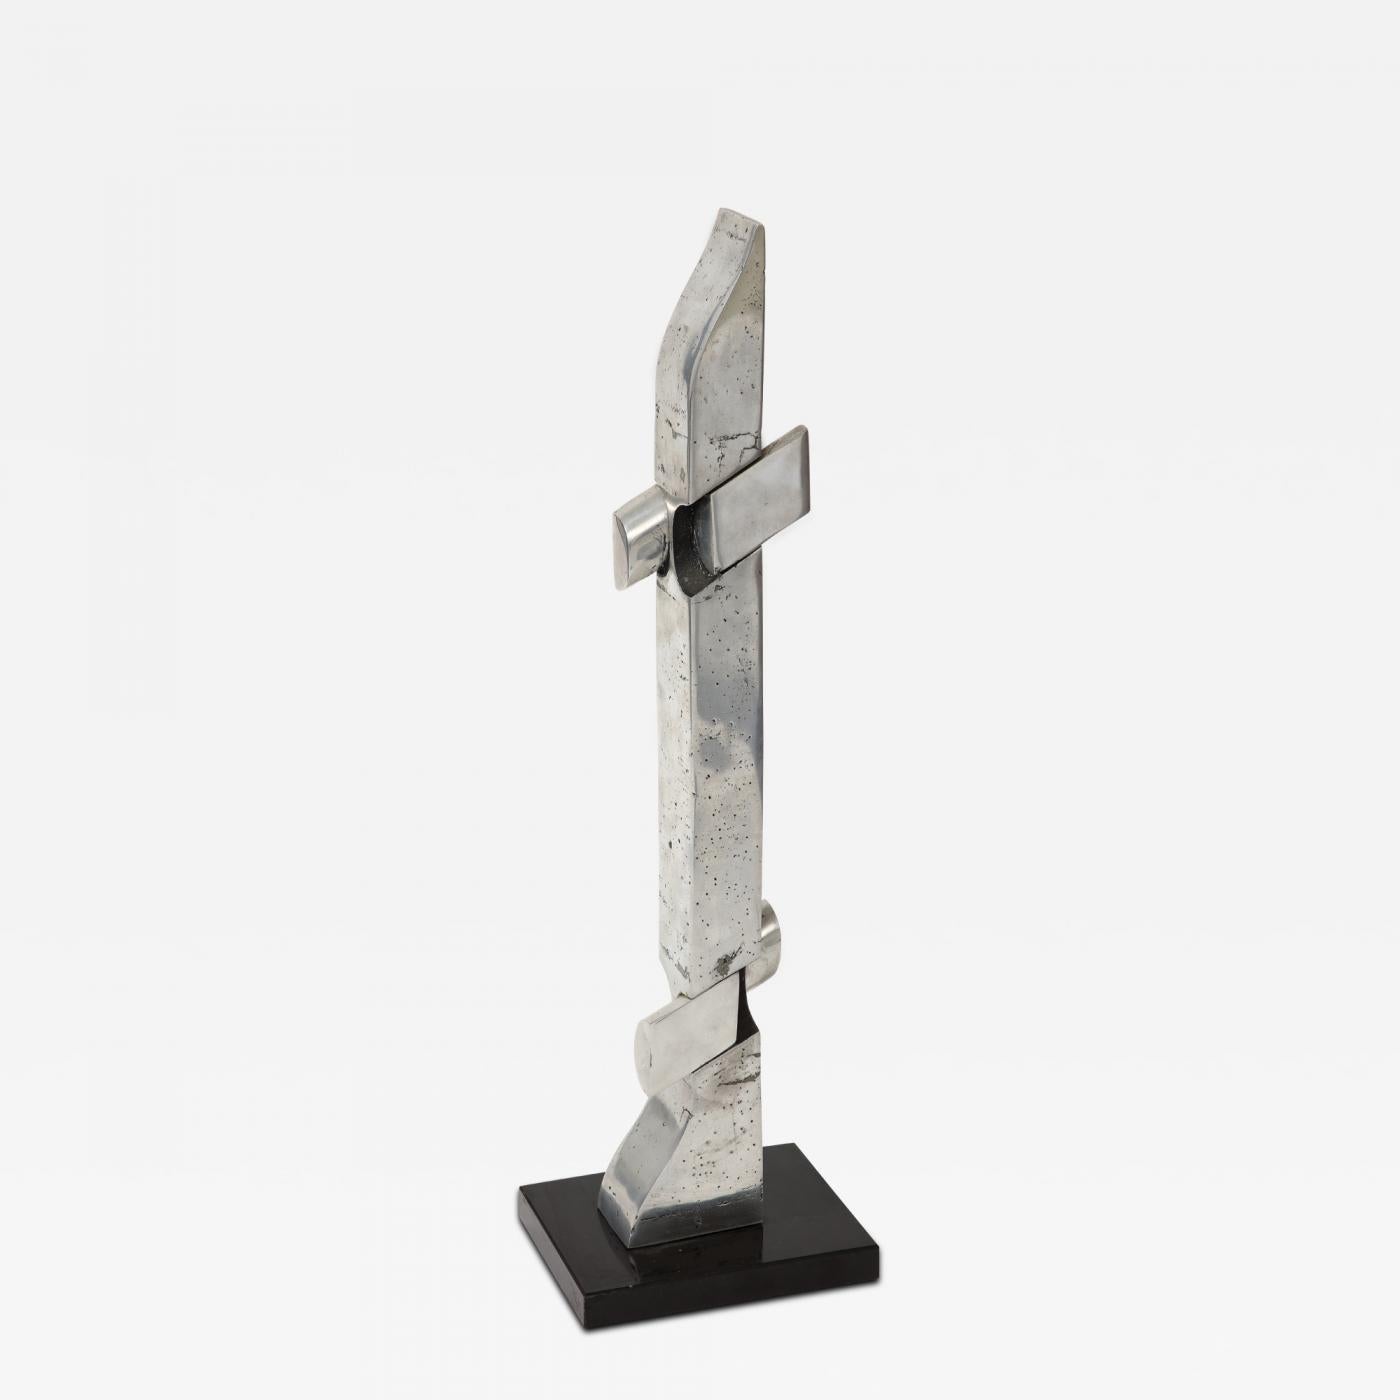 Abstract Chromed Steel Sculpture by Thibaud Weisz, France, c. 1950

Graphic, minimalist sculpture, reminiscent of a skyscraper.
